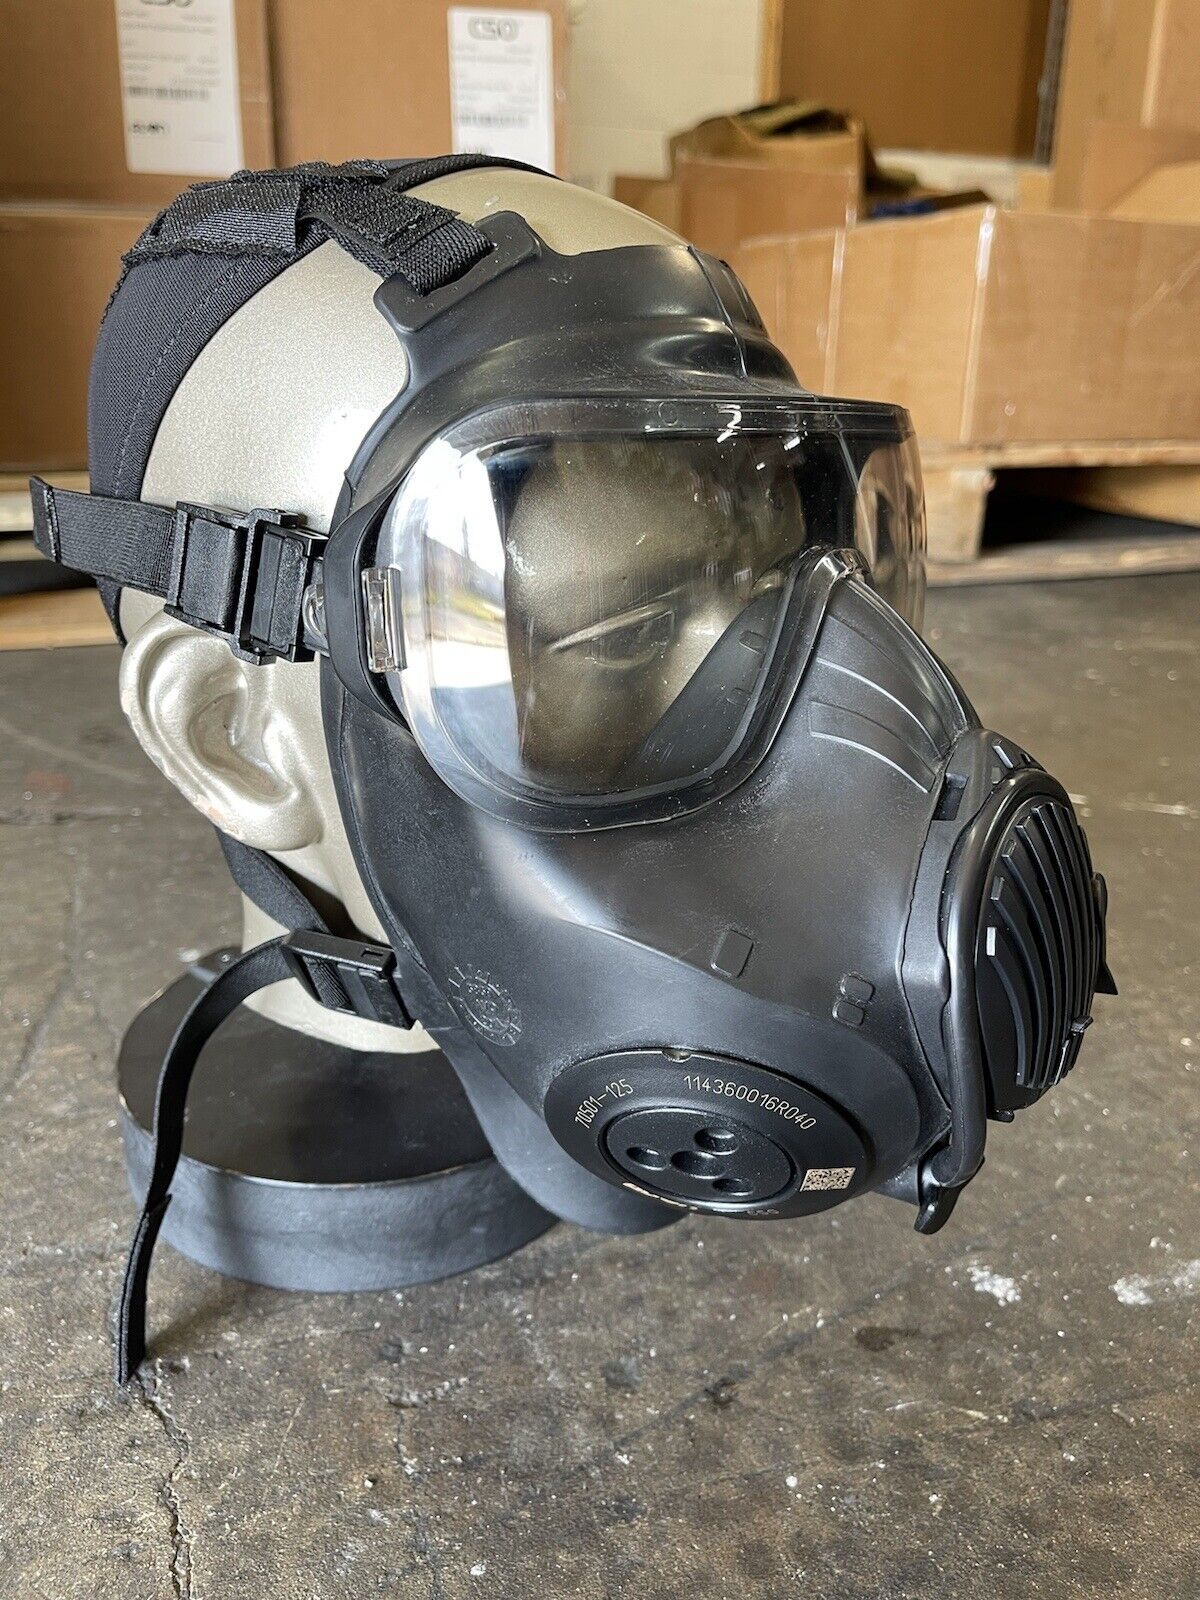 Gas Mask, C50 WITH CLEAR OUTSERT, Large Size, Avon Protection, Used